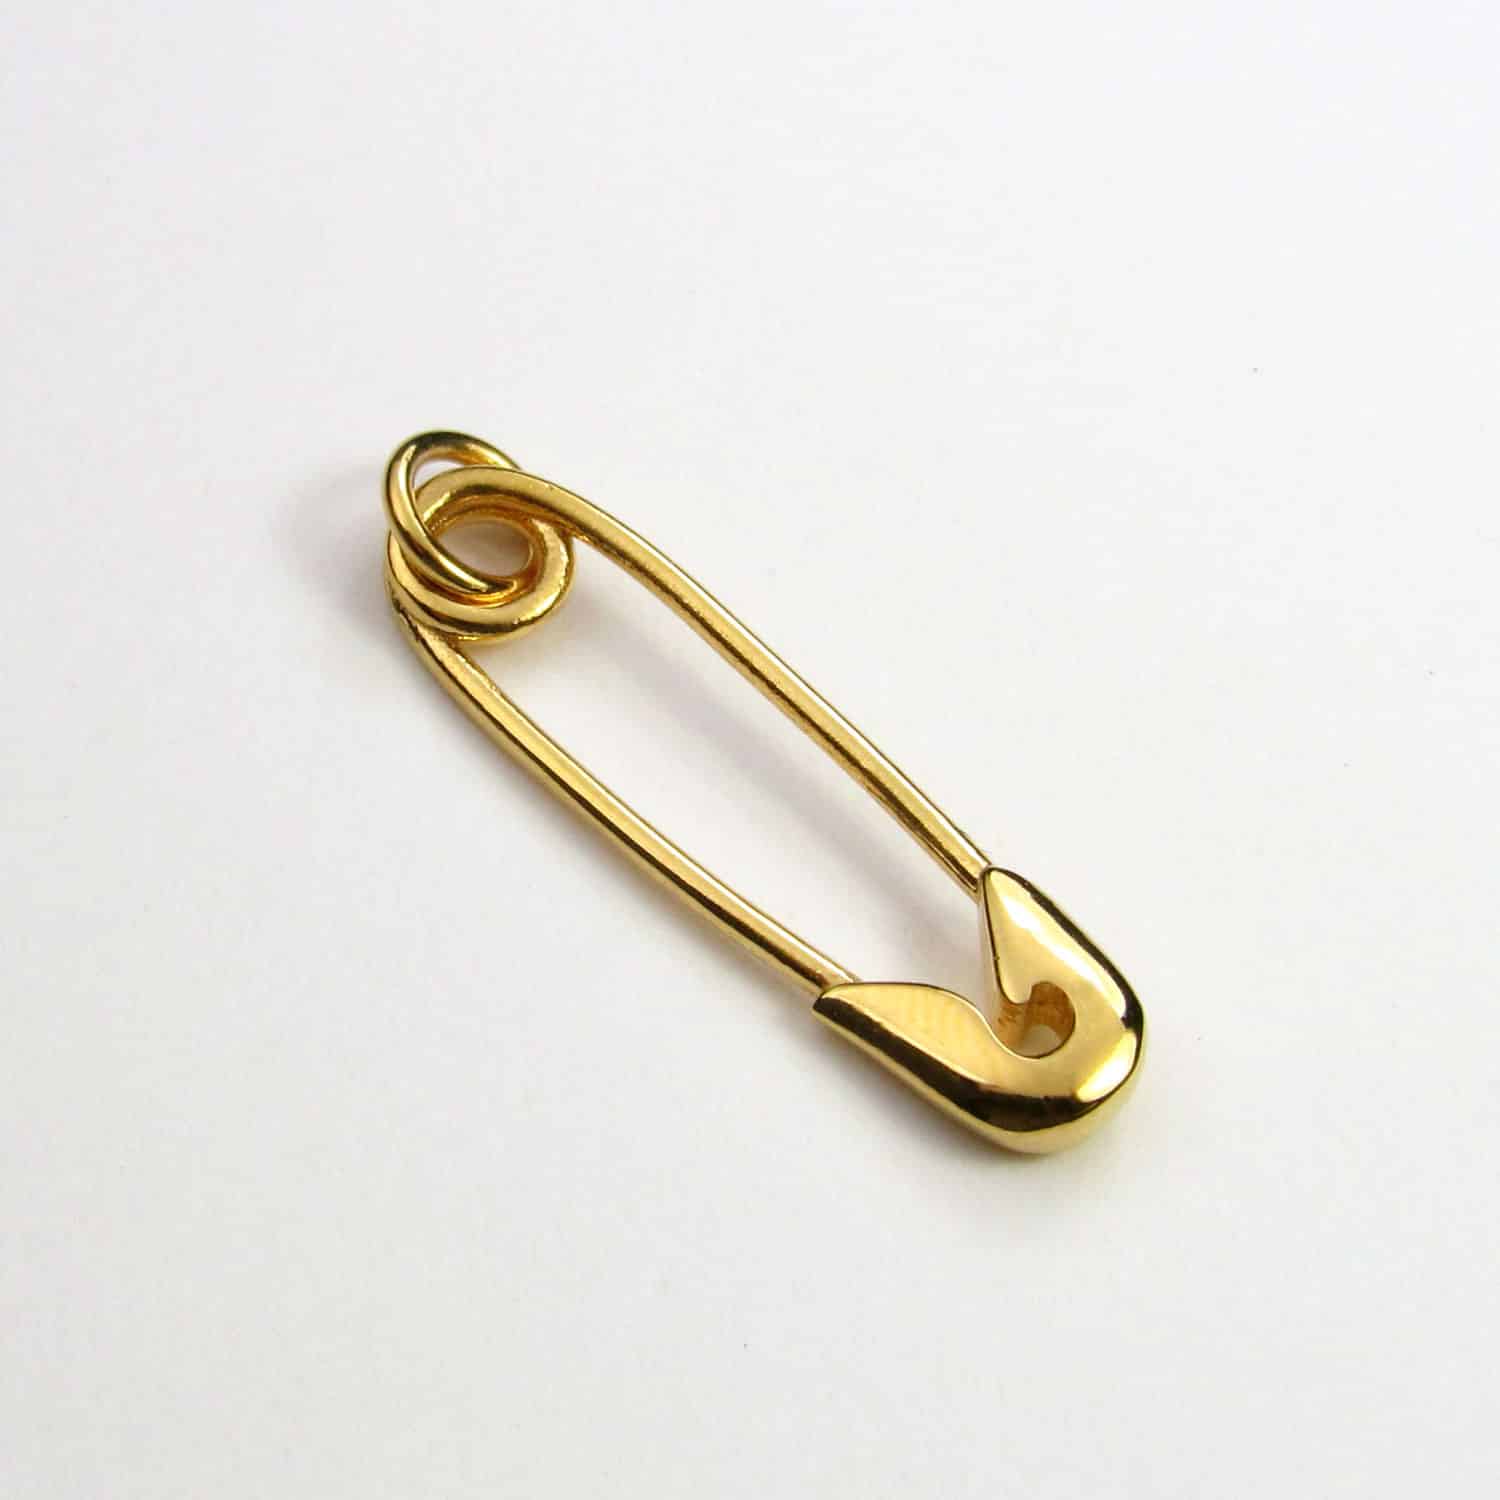 Safety Pin Pendant Gold Vermeil | Sterling Silver & Gold Vermeil ...